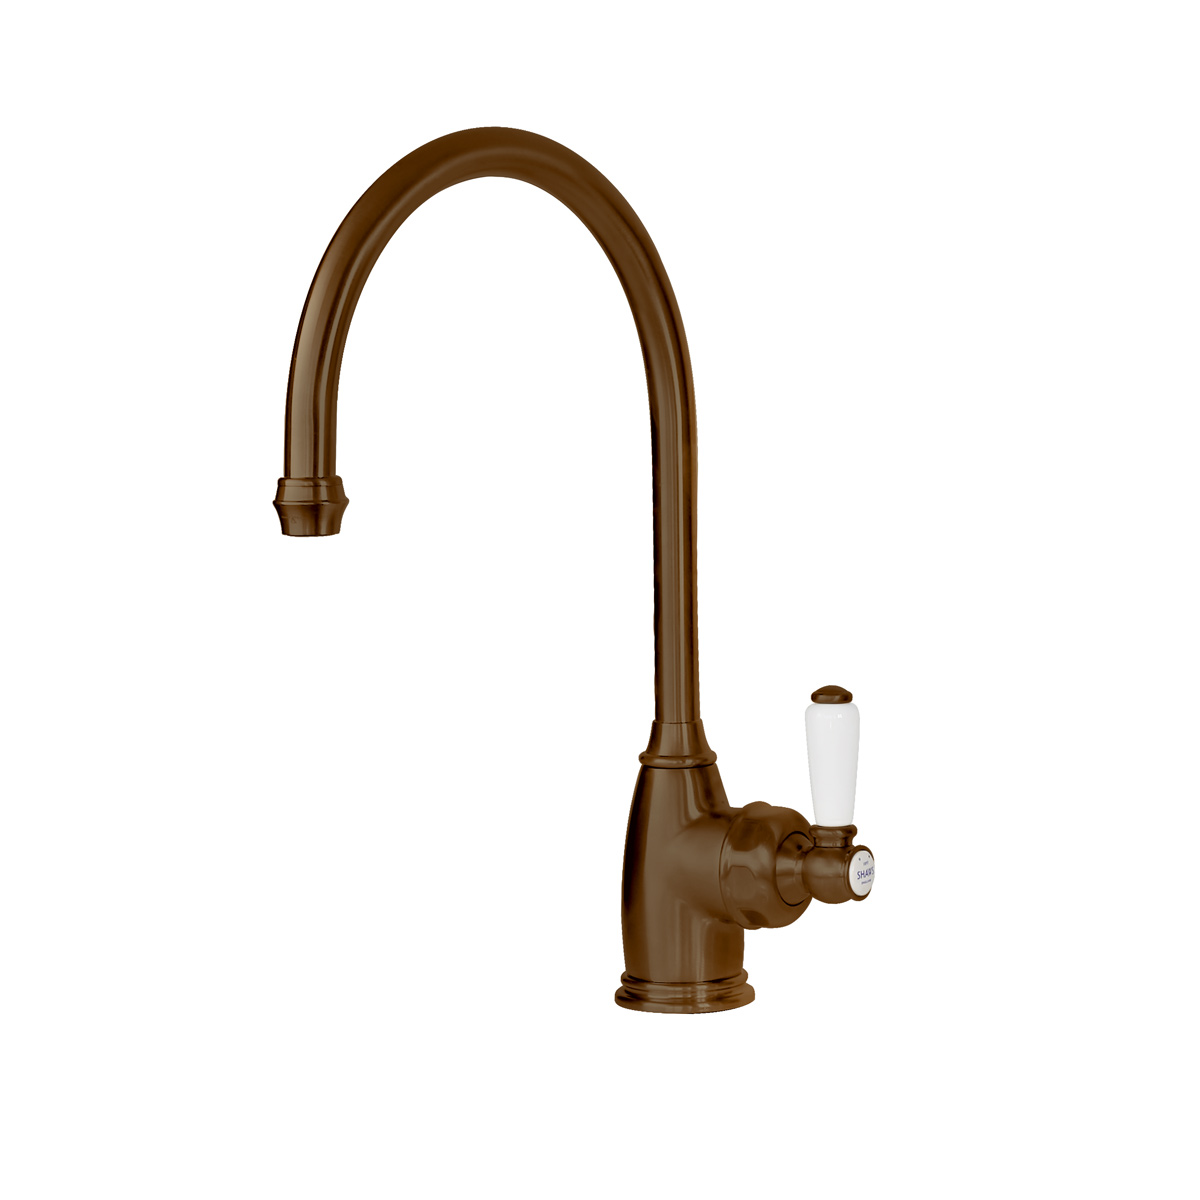 Shaws by Perrin & Rowe Yarrow kitchen mixer in English Bronze. Parthian style monobloc kitchen tap AUSH.4341. Distributed in Australia by Luxe by Design, Brisbane.